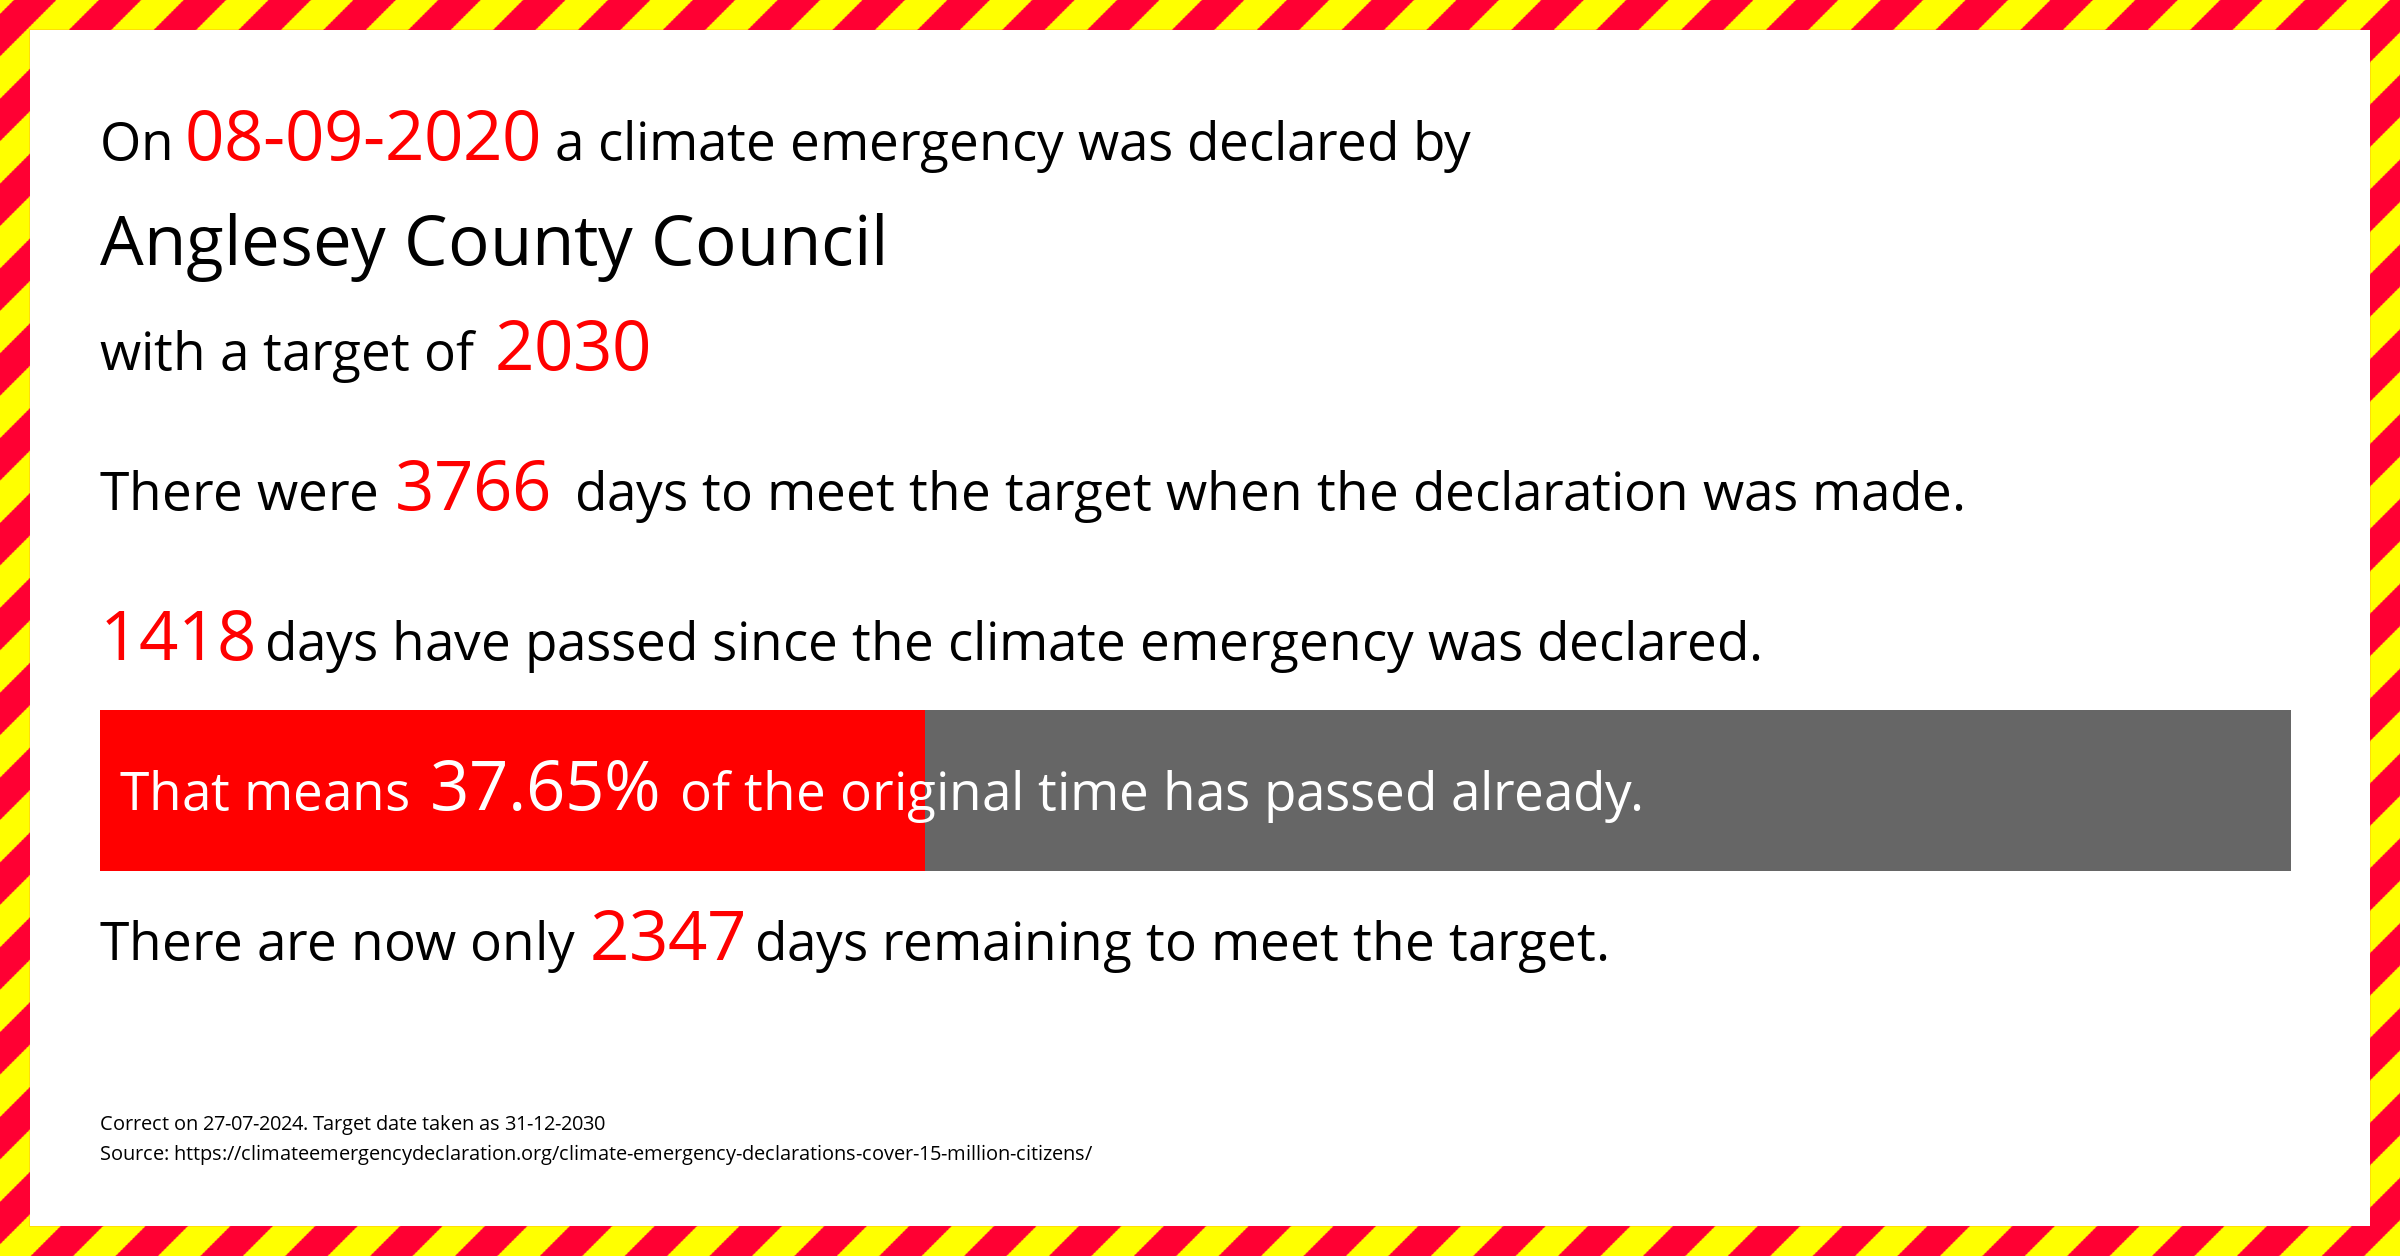 Anglesey County Council  declared a Climate emergency on Tuesday 8th September 2020, with a target of 2030.